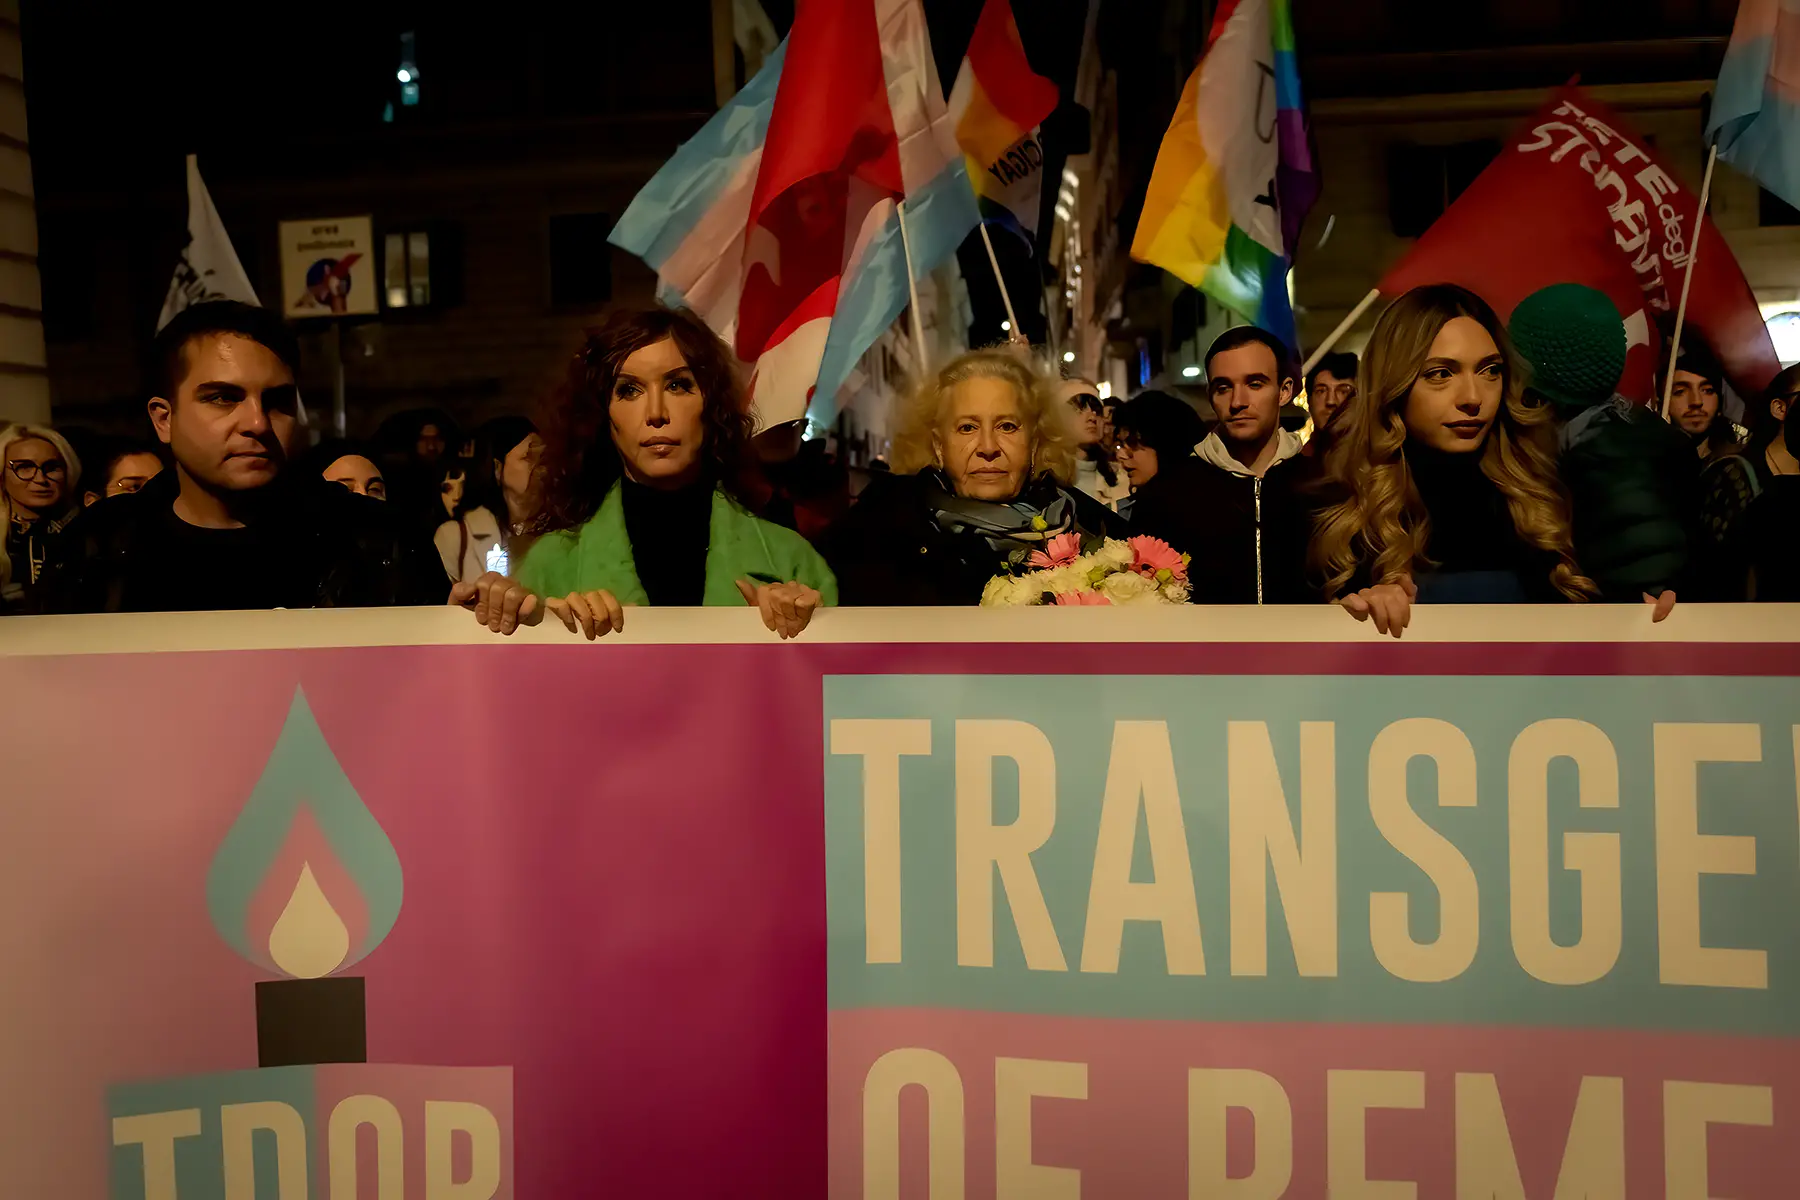 A group of people march with flags and a banner for Transgender Day of Remembrance